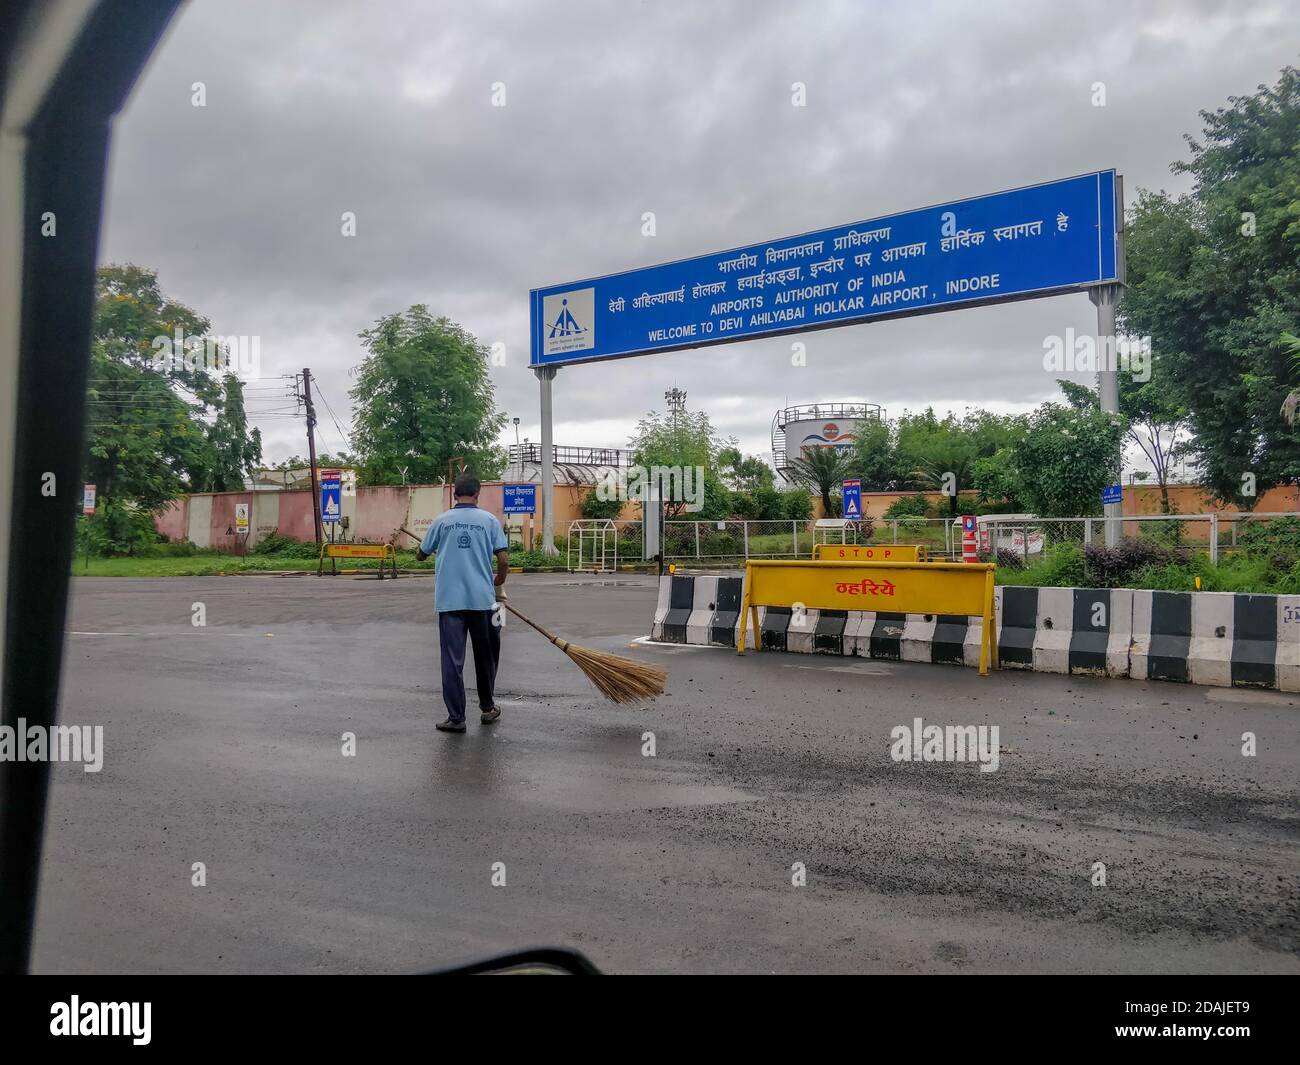 Indore, India - August 22nd 2020: Worker cleaning road outside Indore Airport. Stock Photo